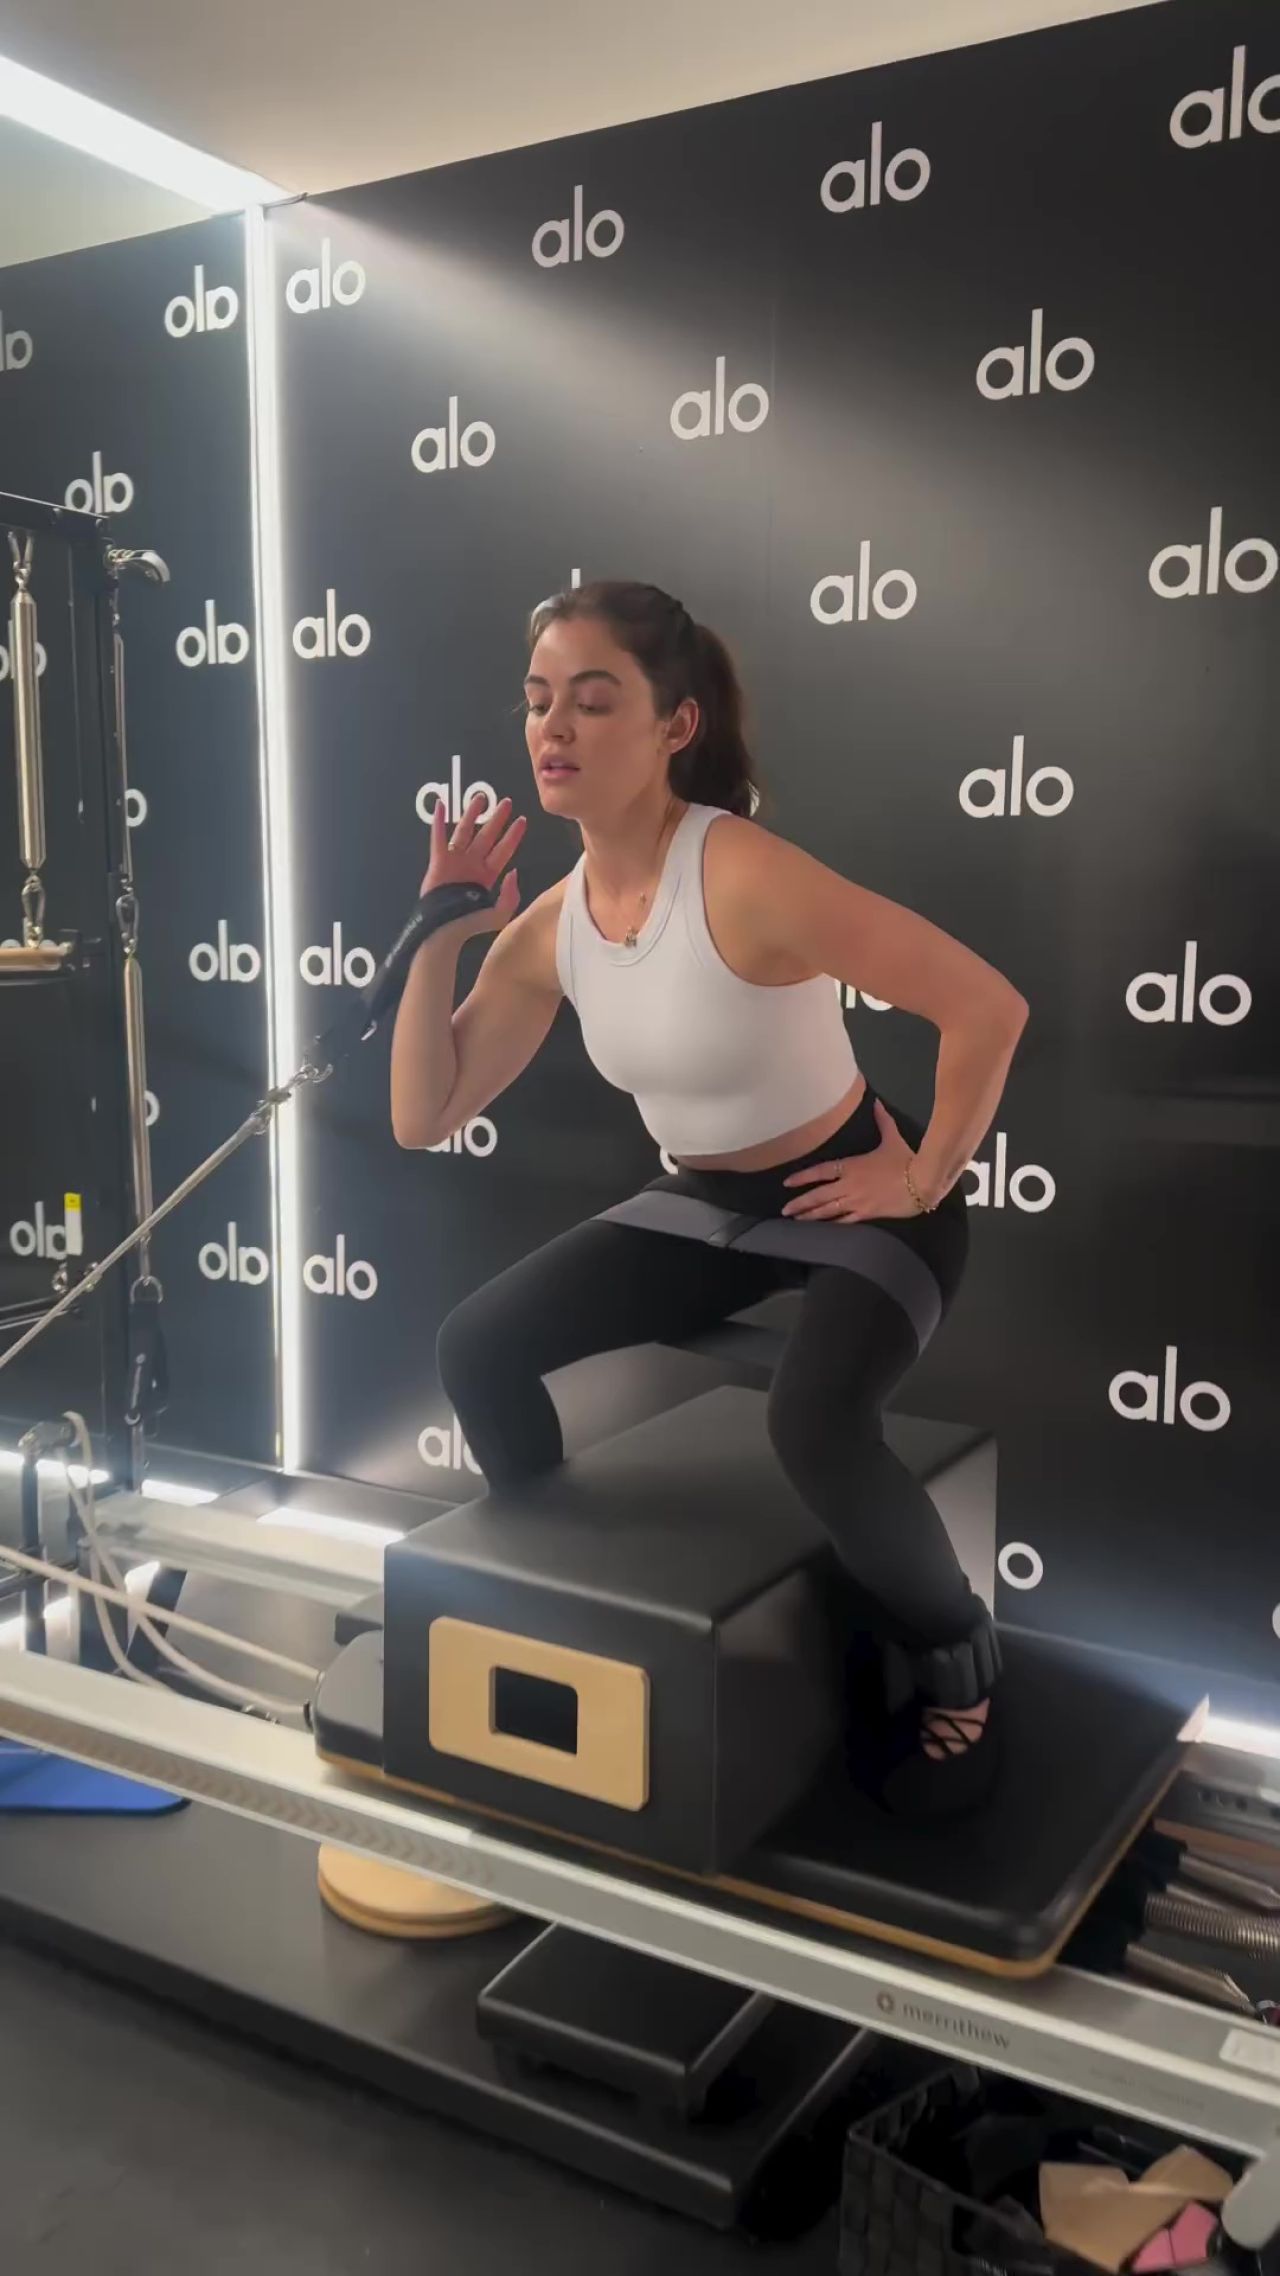 AMERICAN ACTRESS LUCY HALE WORKING OUT GYM STILLS